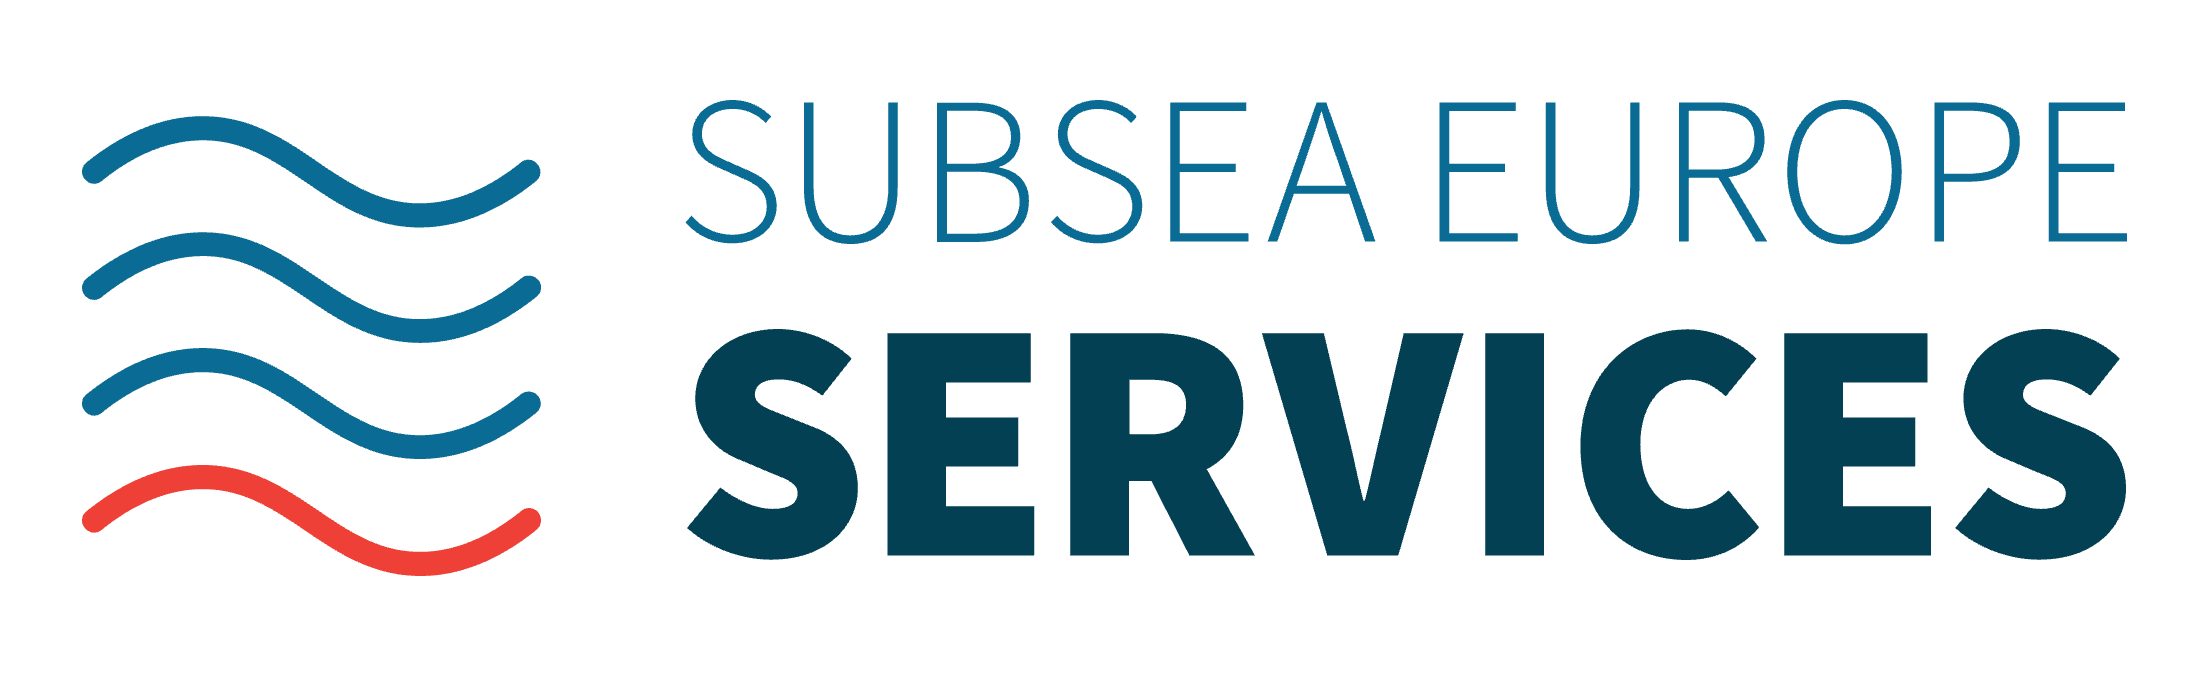 Subsea Europe Services GmbH